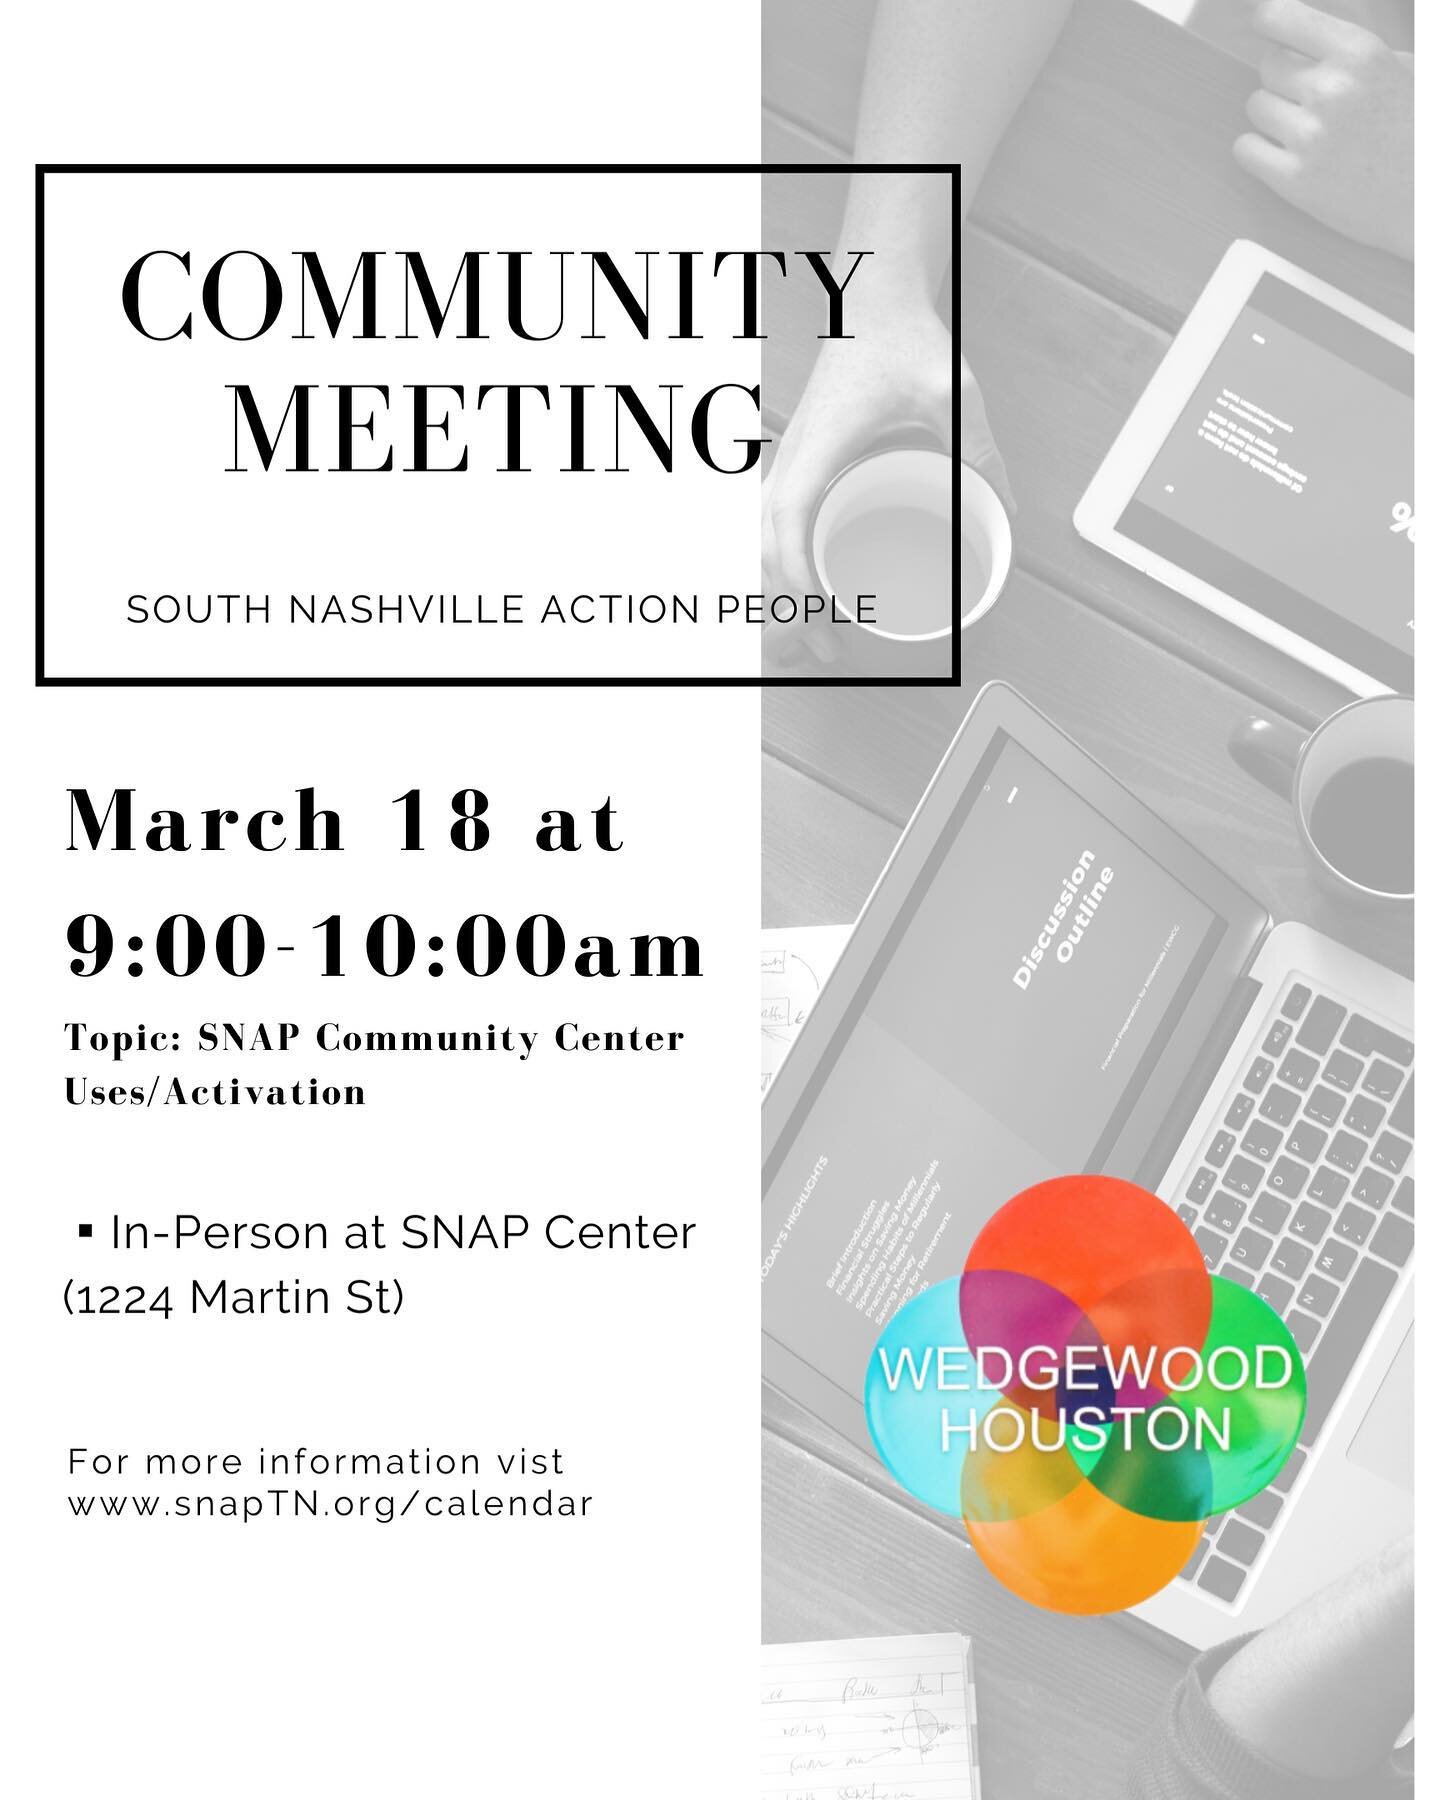 Join us at the SNAP Center (1224 Martin St.) for the March community meeting. As our long-term lease ends this summer with our current community center tenant we look forward to exploring future community focused uses for the property with our neighb